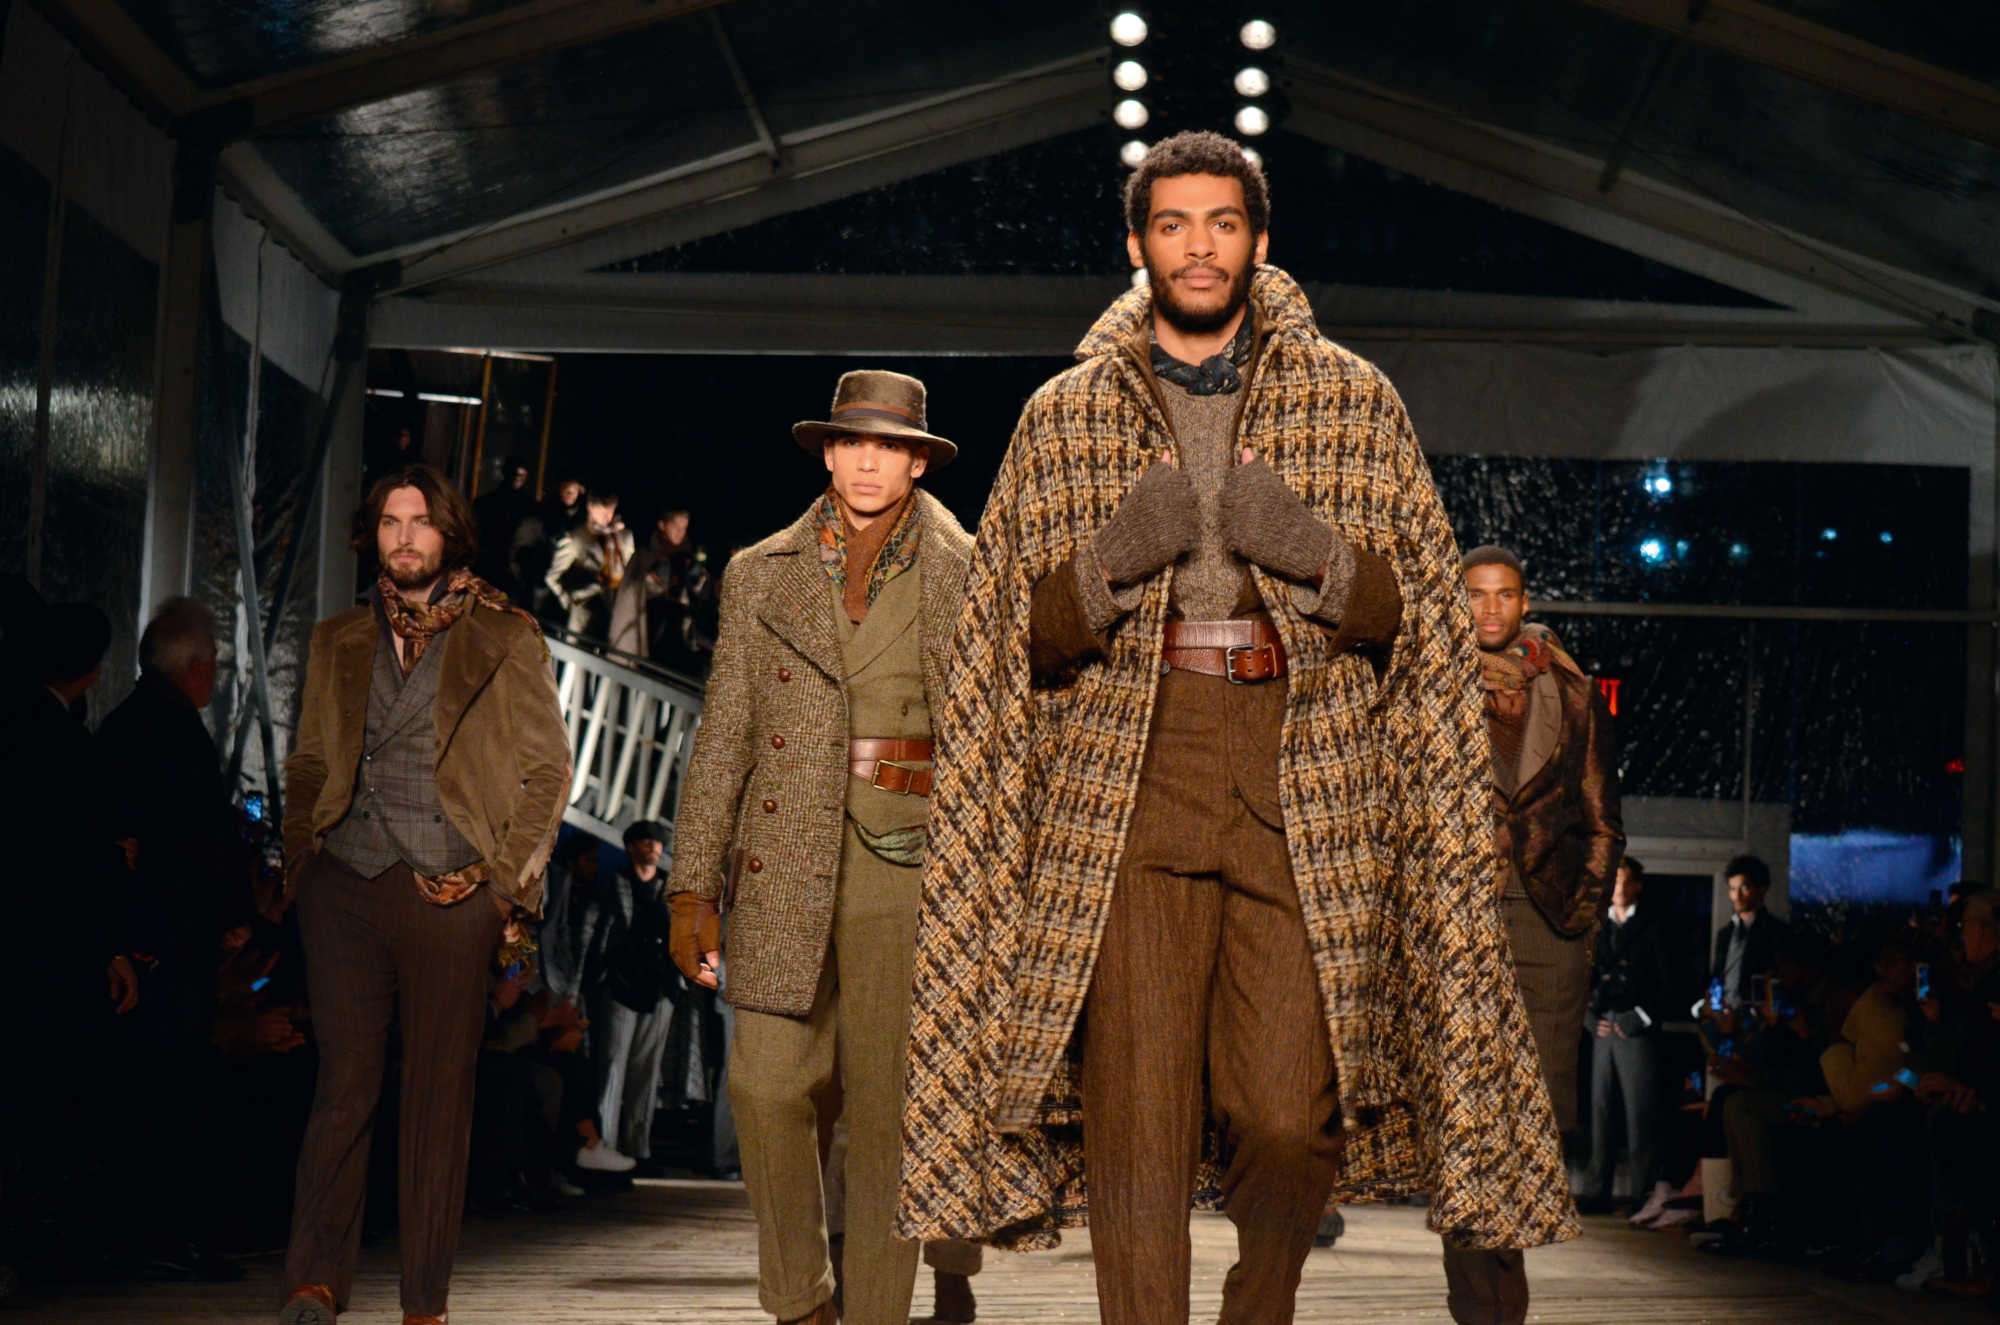 Joseph Abboud. Fall/Winter 2019 collection at New York Fashion Week. Photograph by Laurie Schechter. Picture credit: © Laurie Schechter/Totally Cool®